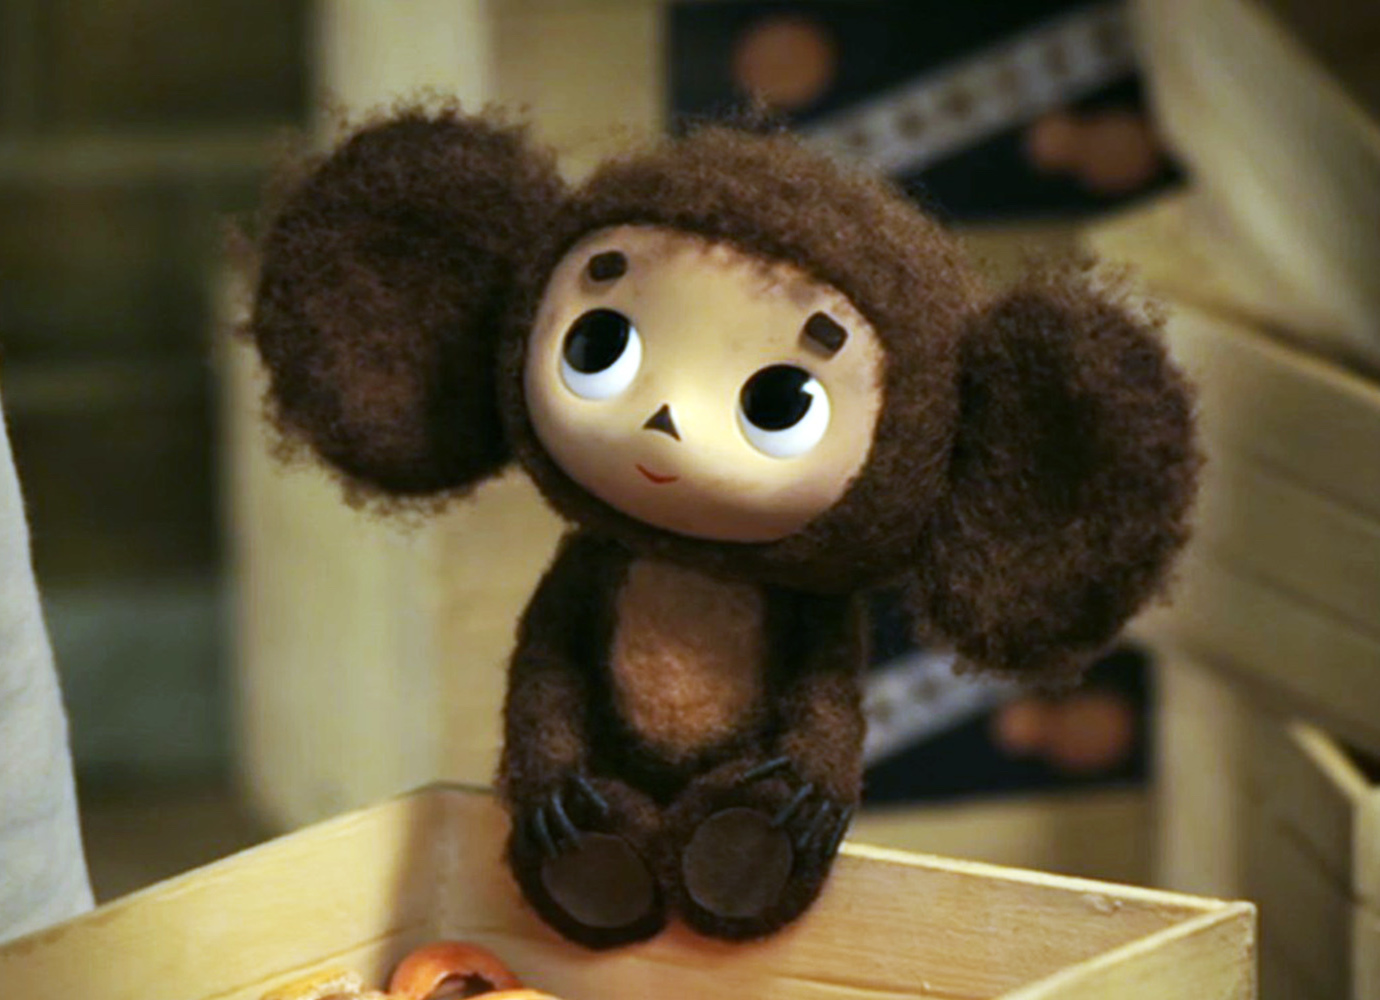 50 years of Cheburashka: why the Soviet Union’s best-loved cartoon character is still winning hearts after half a century